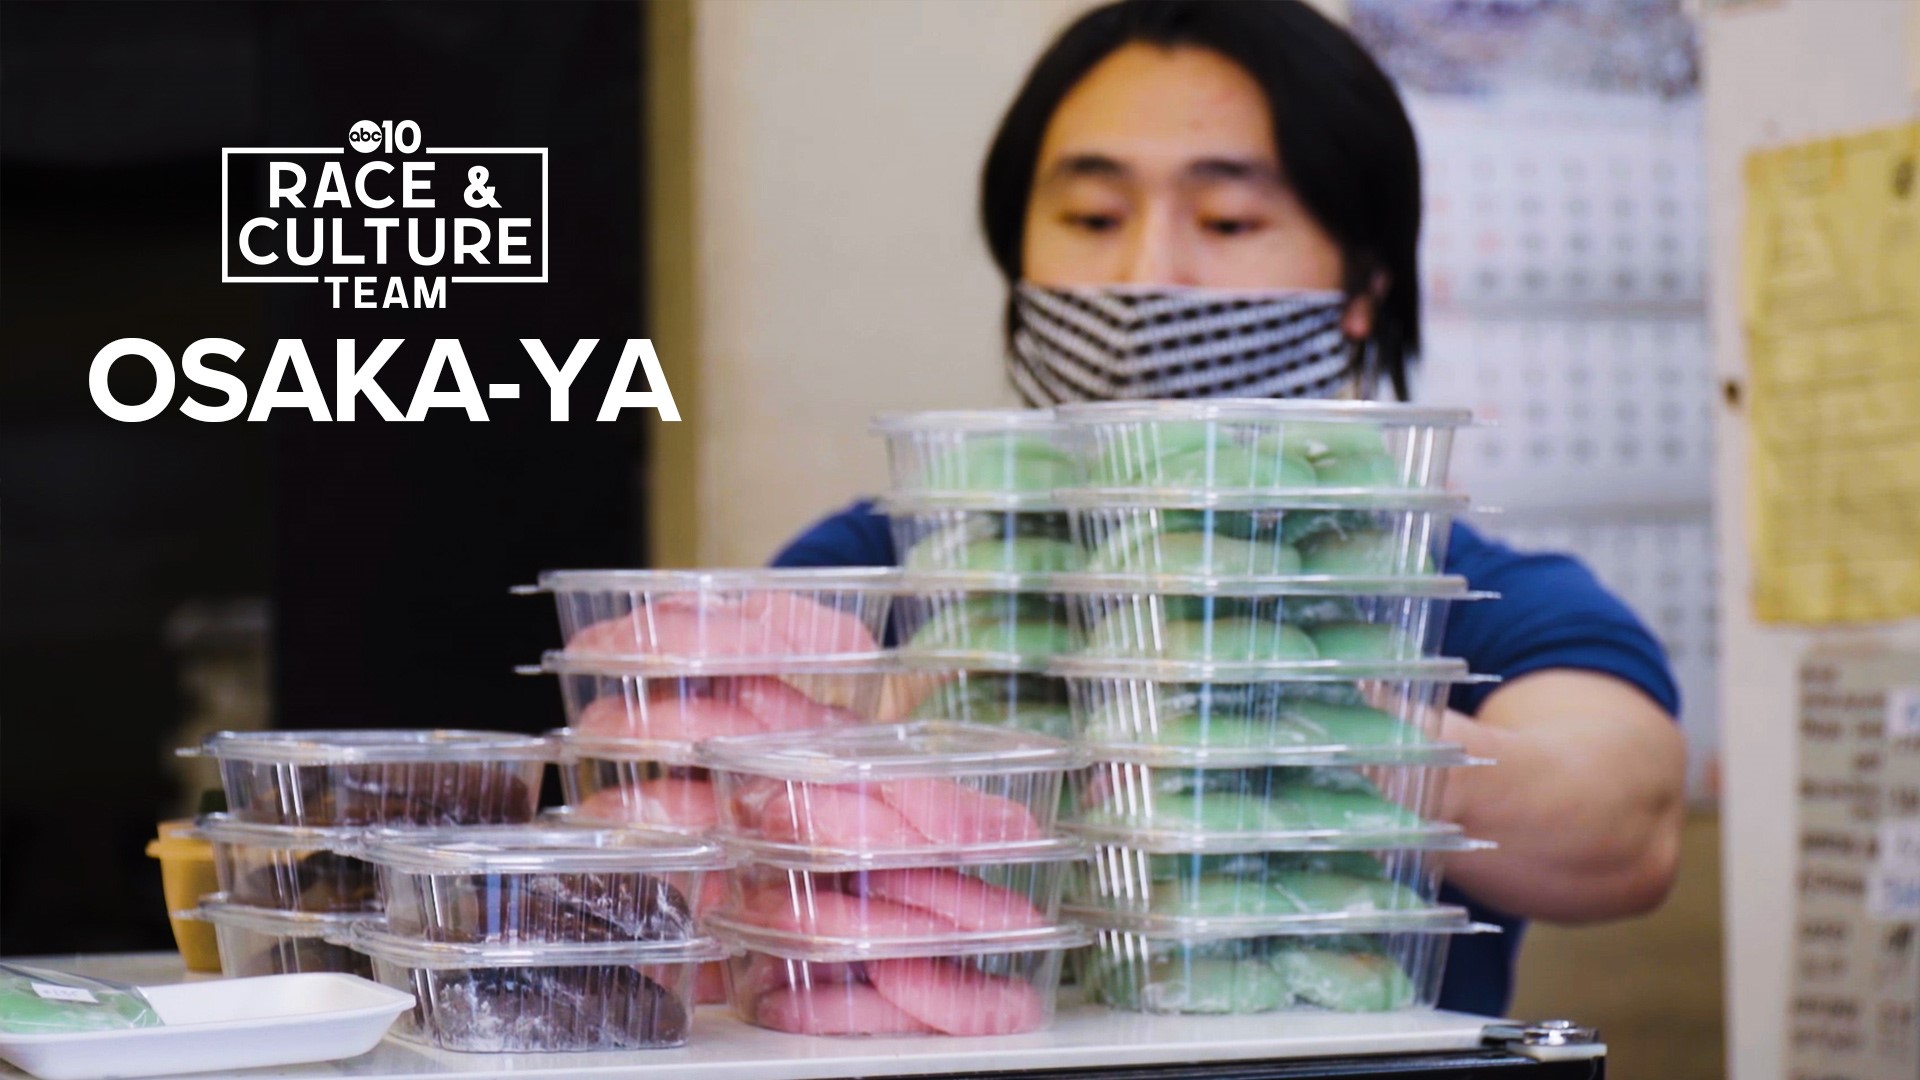 It's labor intensive but Mochi cooks at Osaka-Ya believe in making the Japanese confection the traditional way. | ABC10 Race and Culture Team